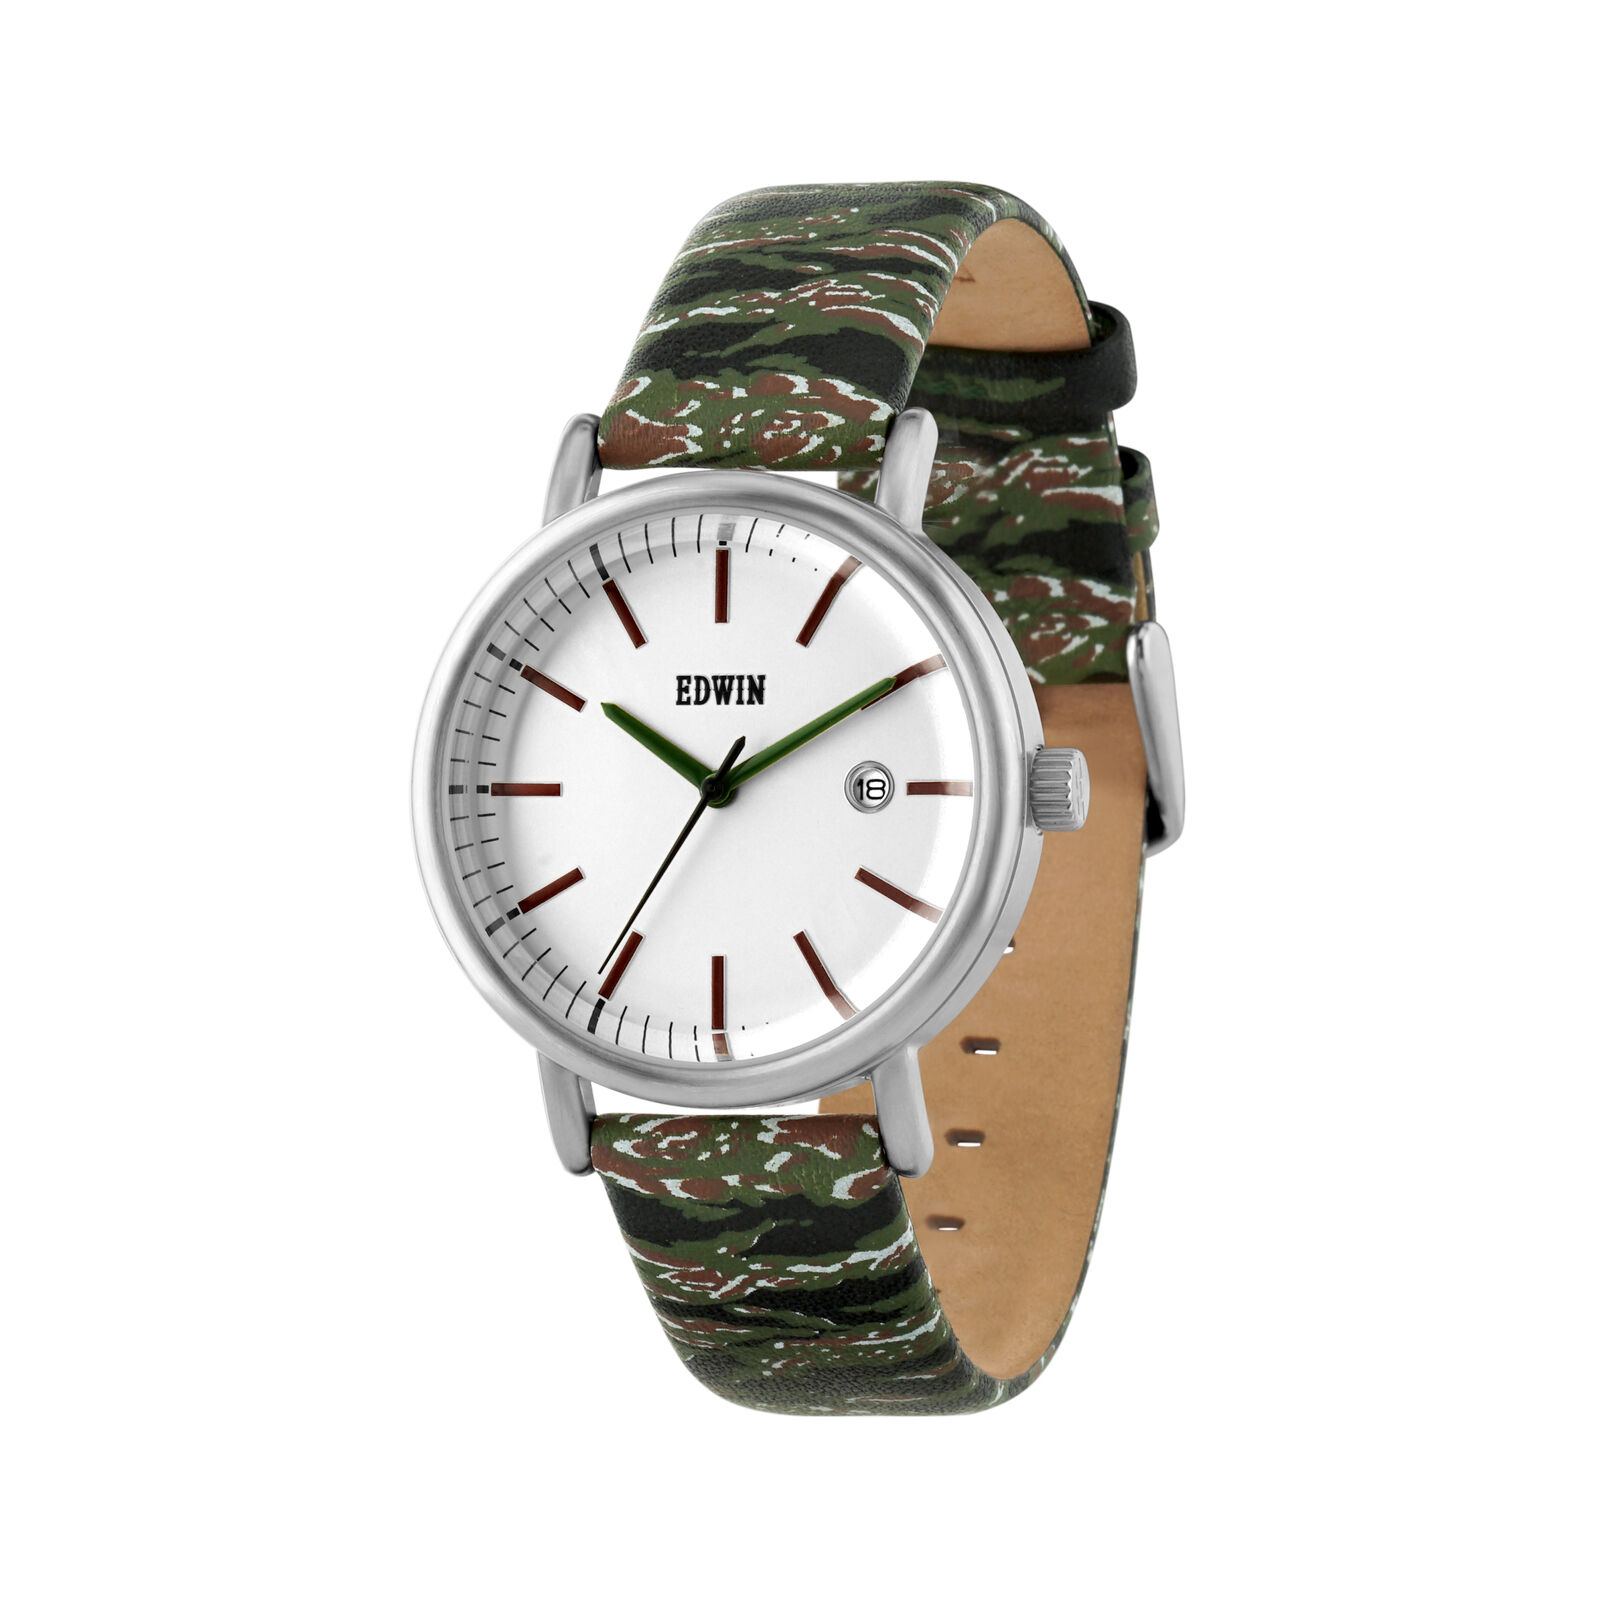 Edwin TIGER CAMO Women's 3 Hand-Date Watch,Stainless Steel Case,Leather Band